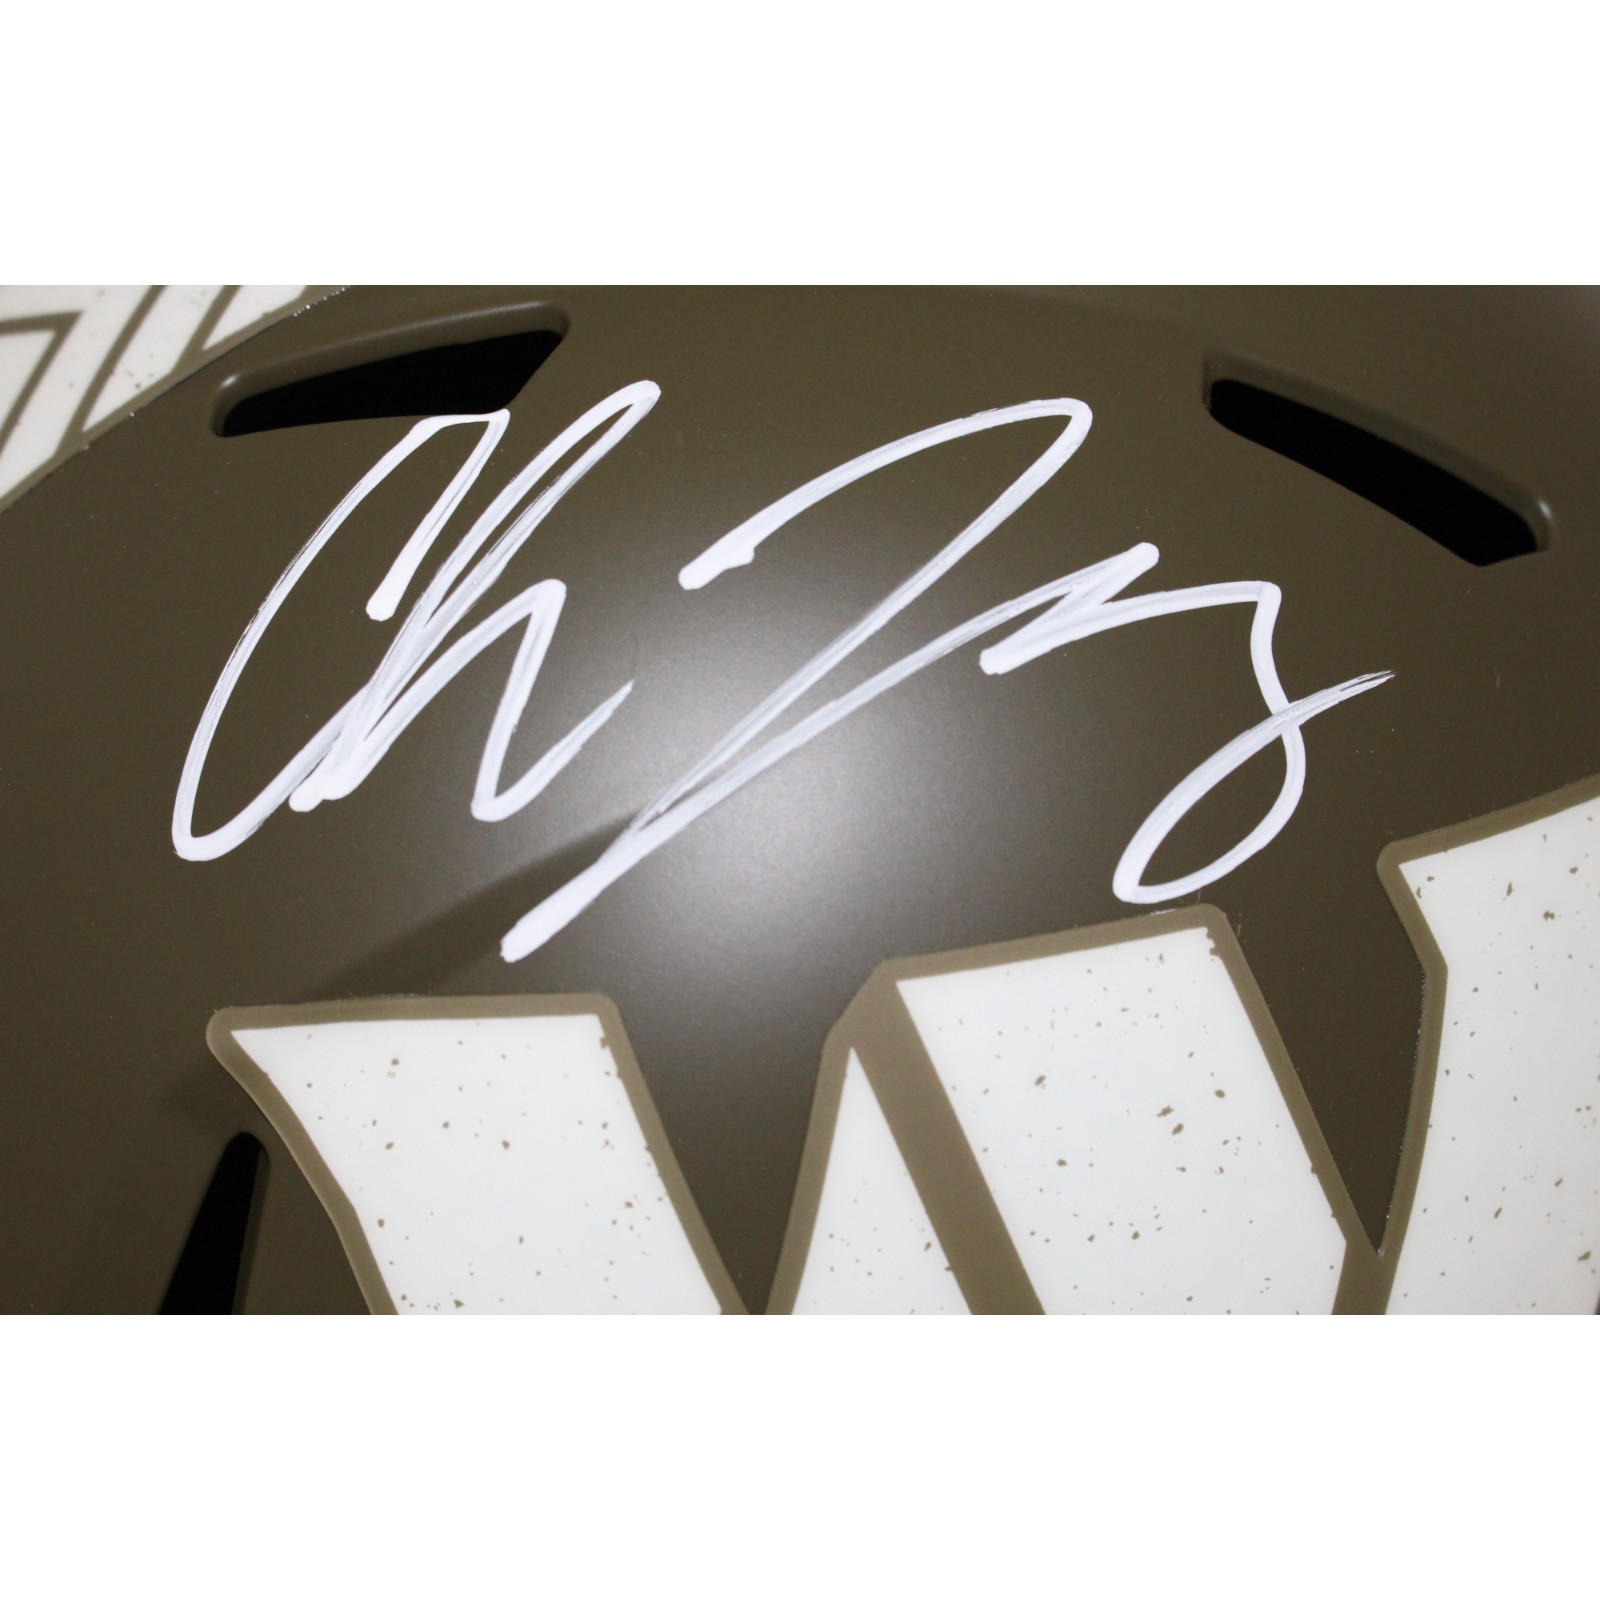 Chase Young Signed Washington Commanders F/S Salute 22 Helmet FAN